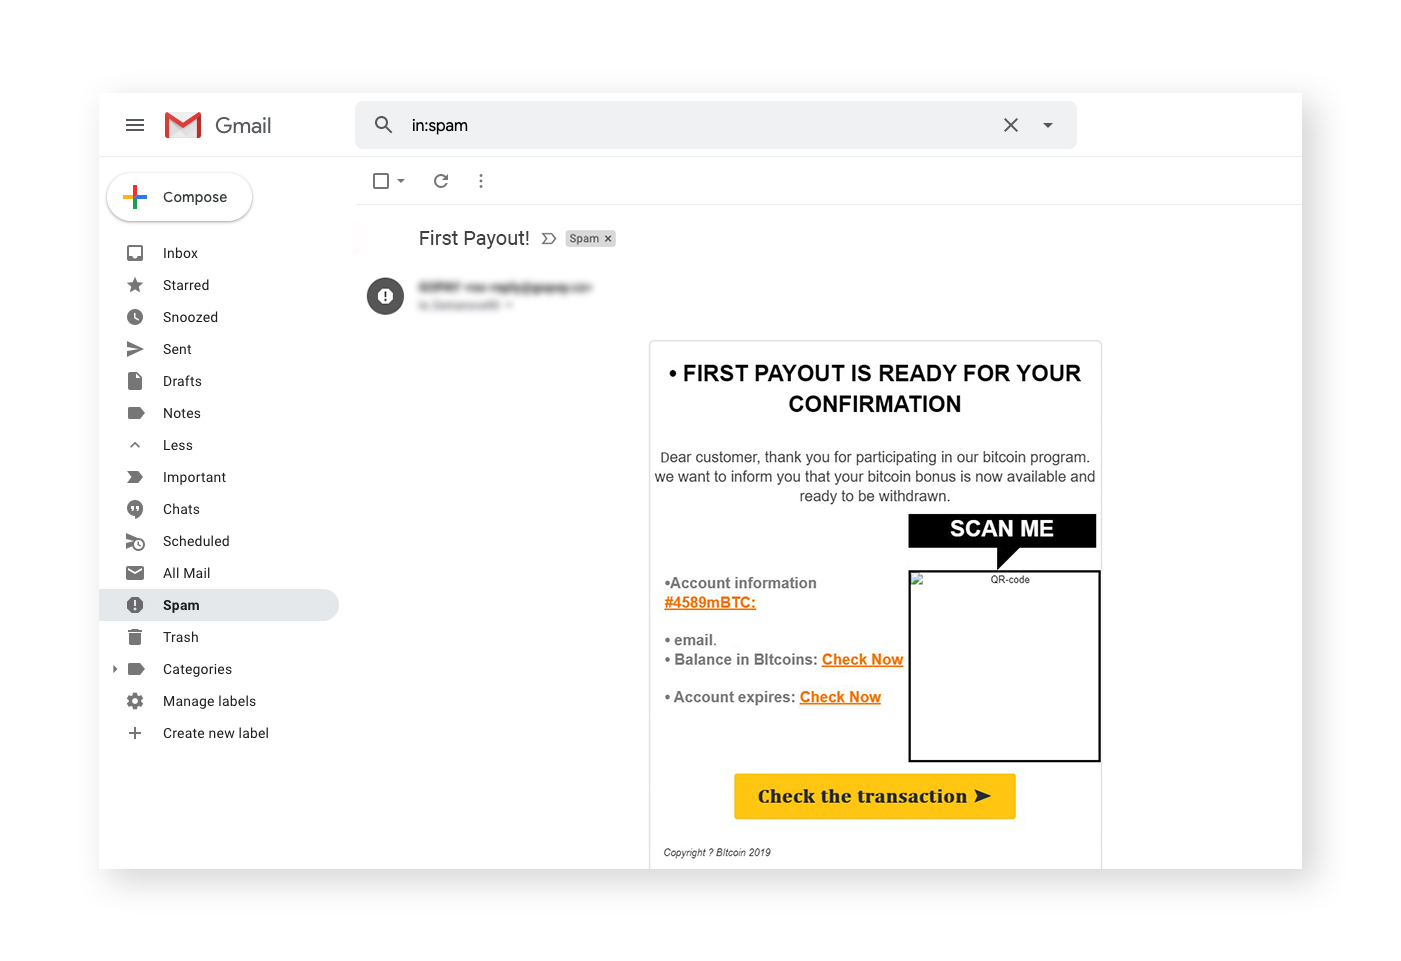 An example of a phishing email with a malicious link